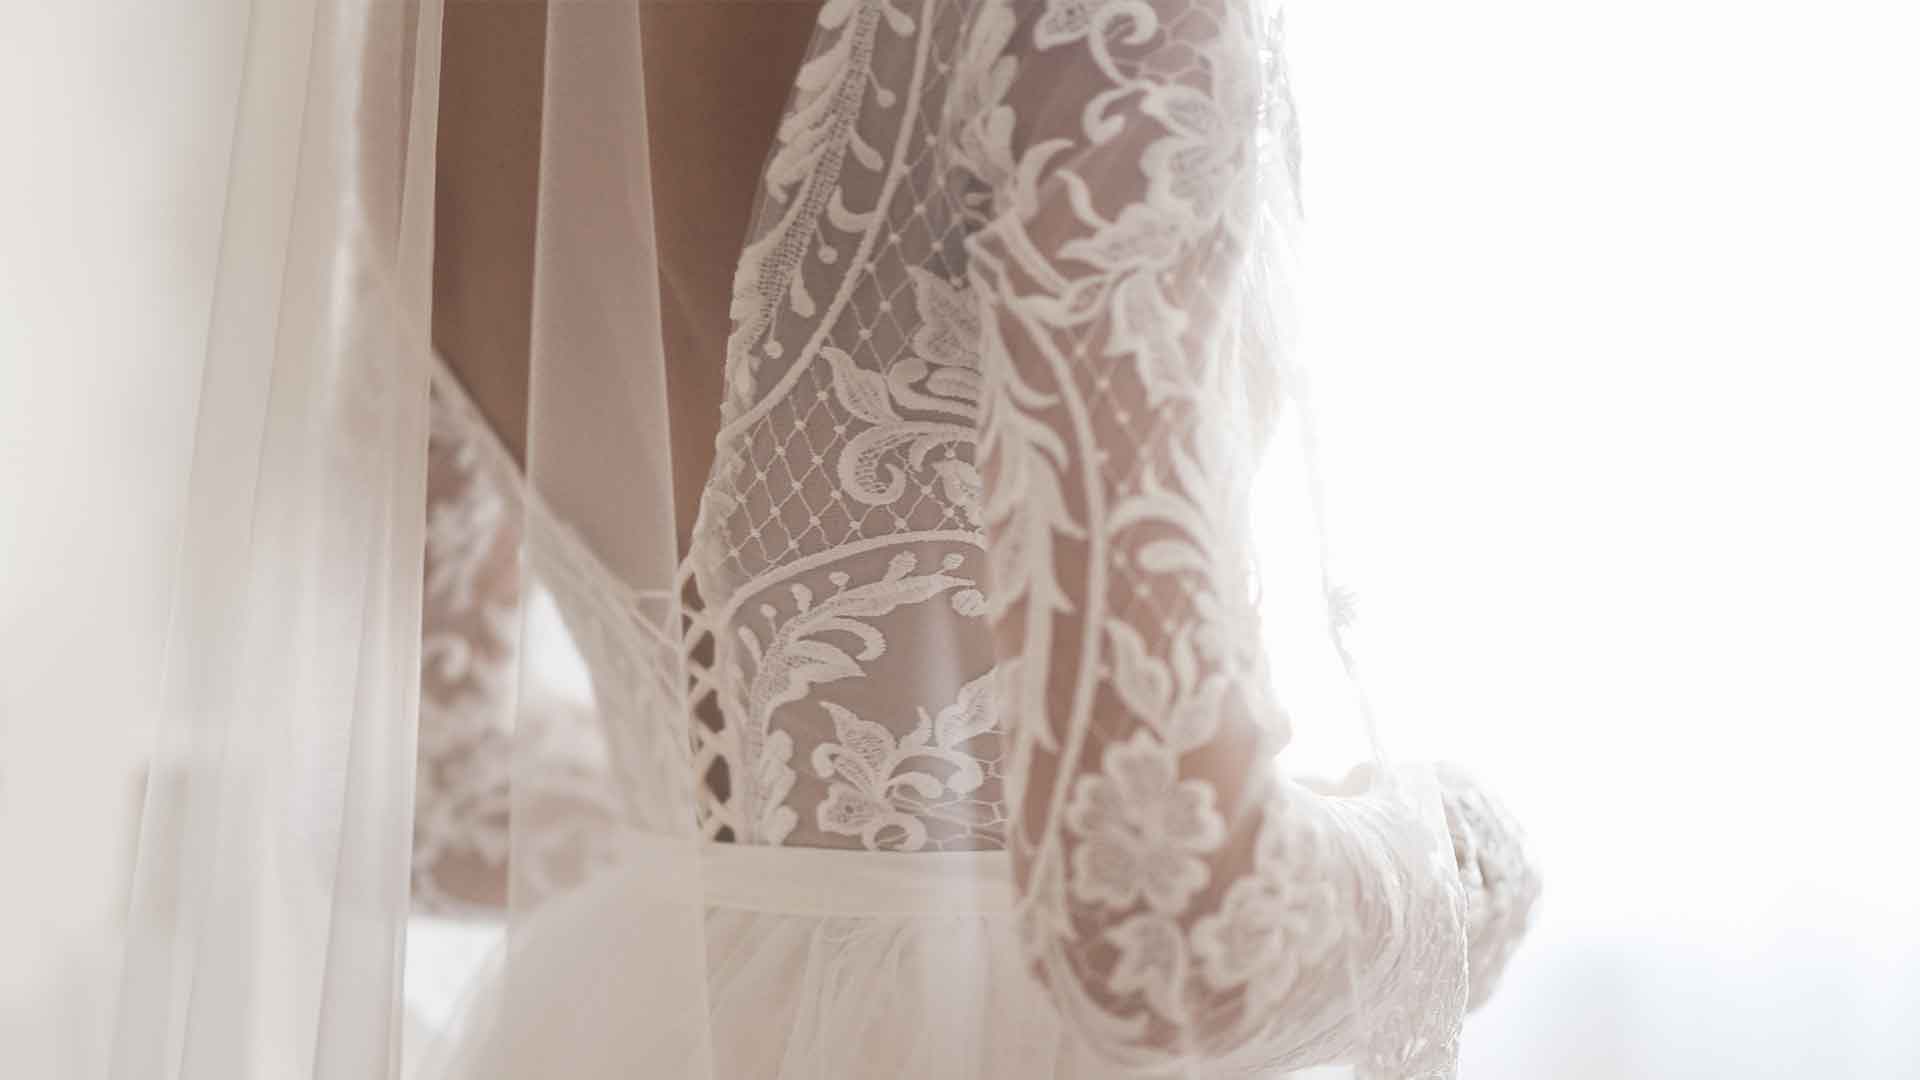 A bride in a white wedding dress with a veil.